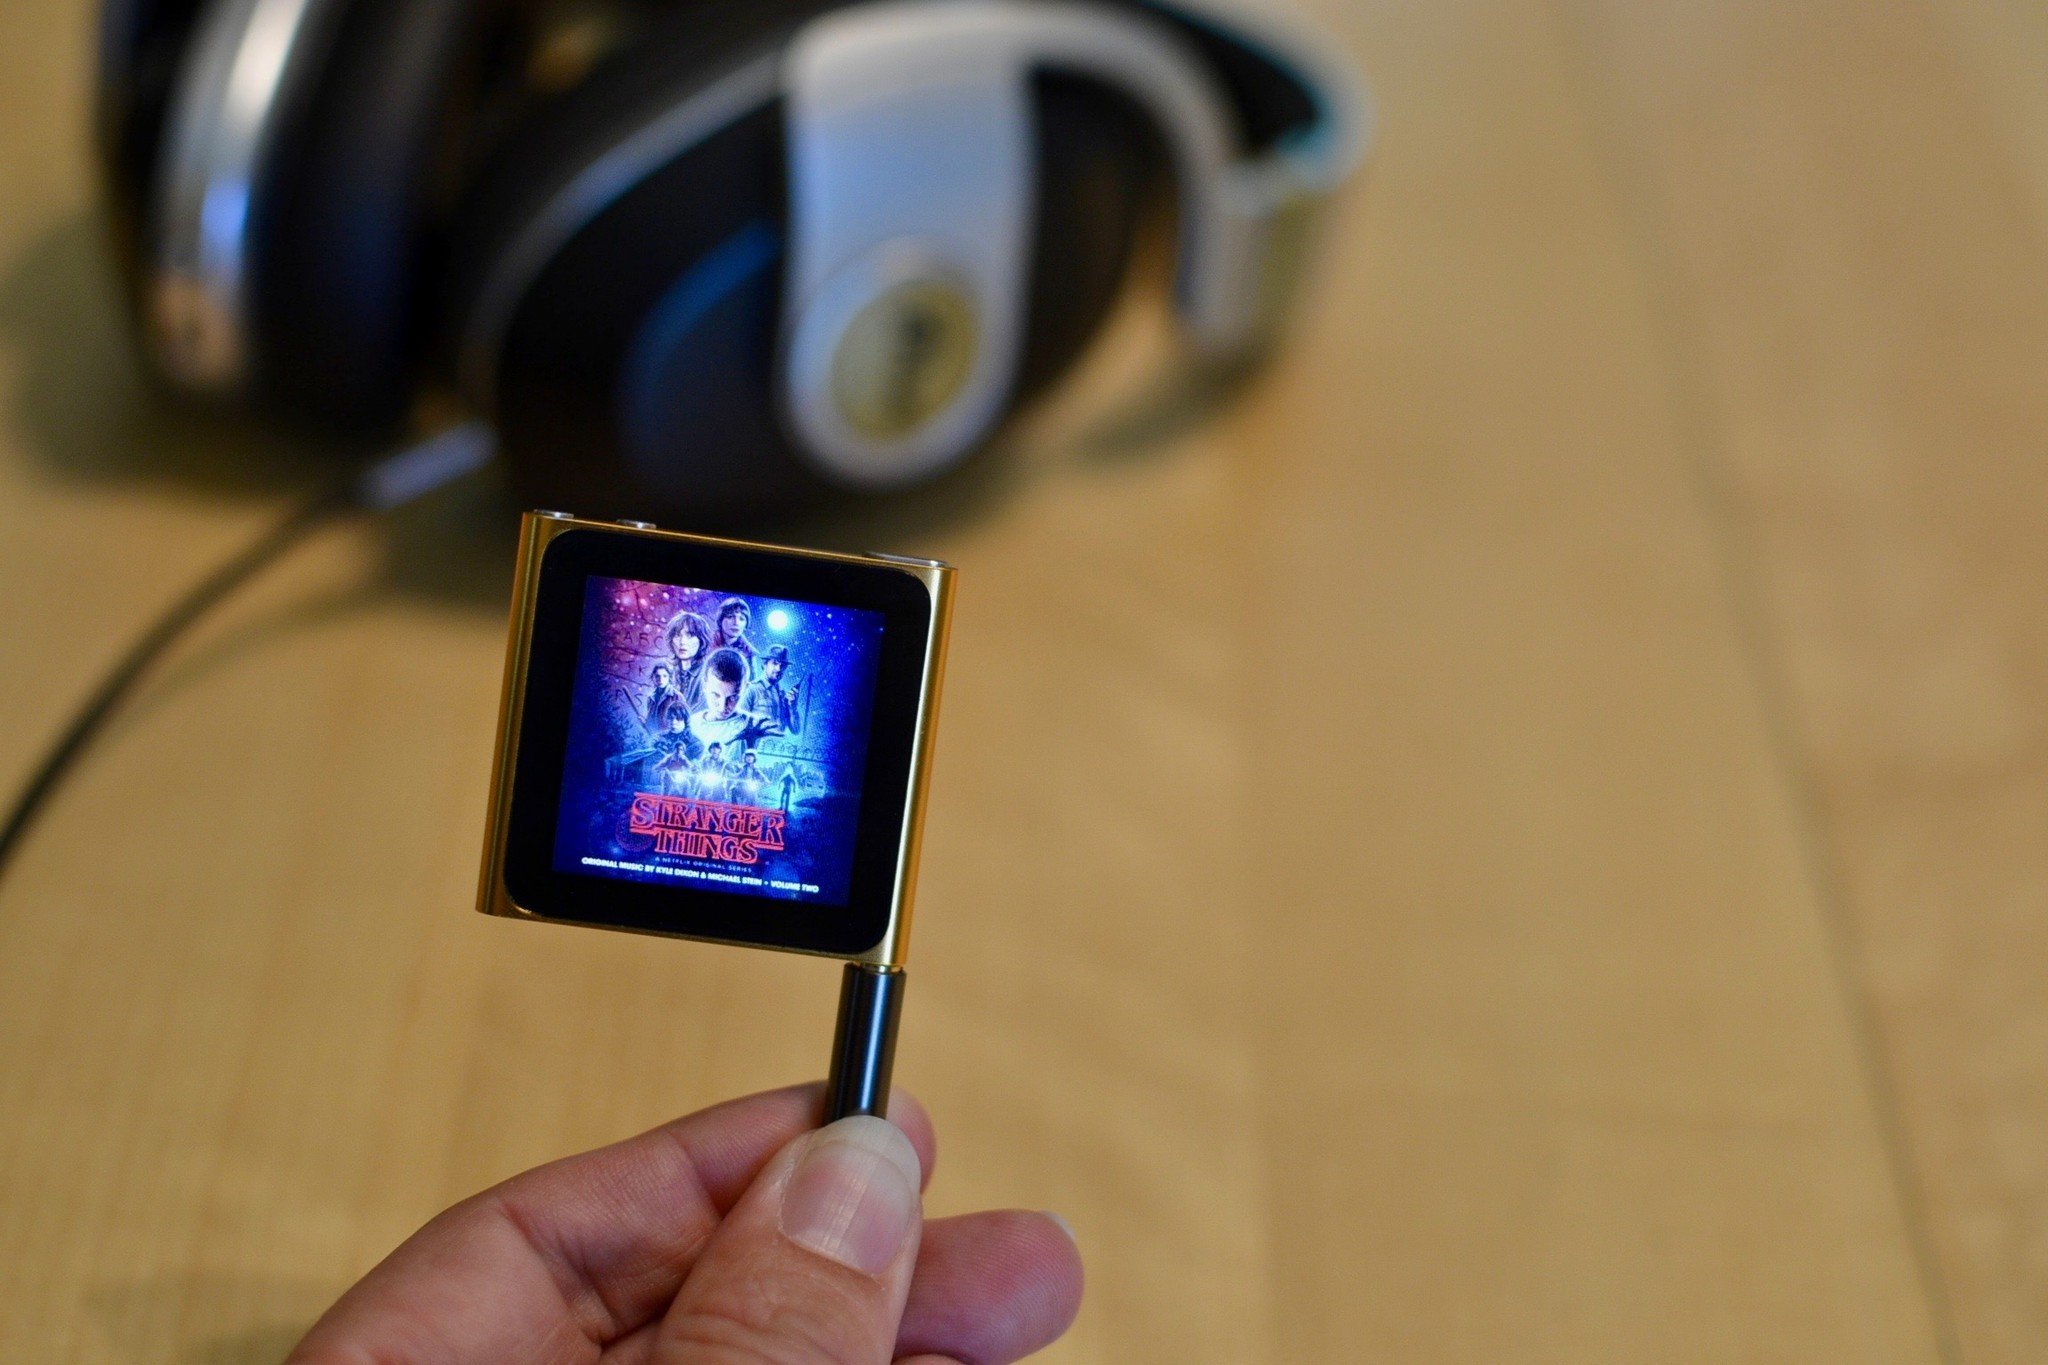 iPod nano may not be as important as it was in the past ...